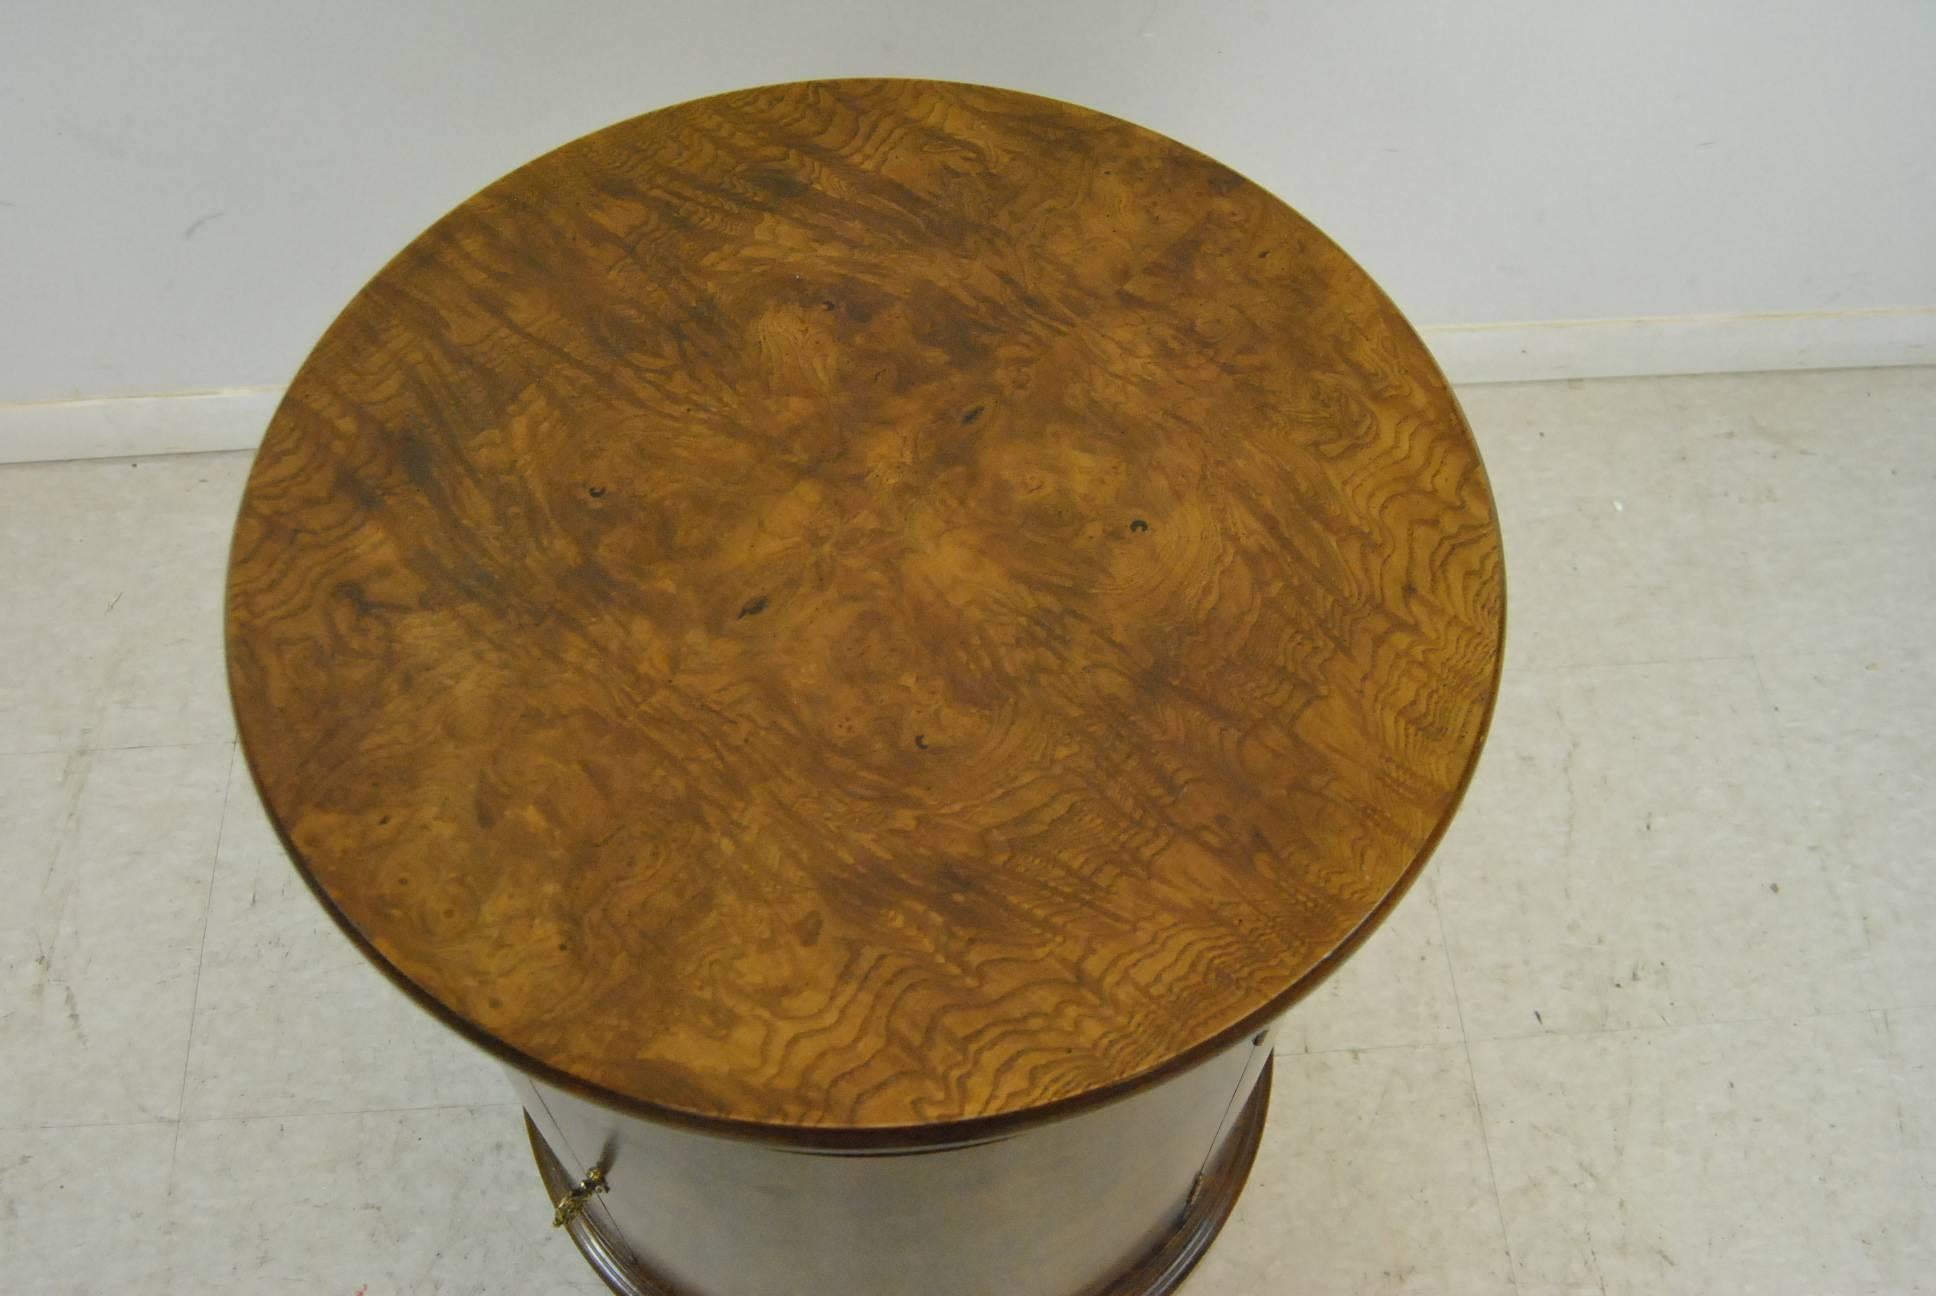 An exceptional round burled walnut pedestal table by Henredon. This beautiful piece features a single door and an adjustable shelf. Very good condition with the original finish. Beautiful and designed for daily use. Dimensions: 21